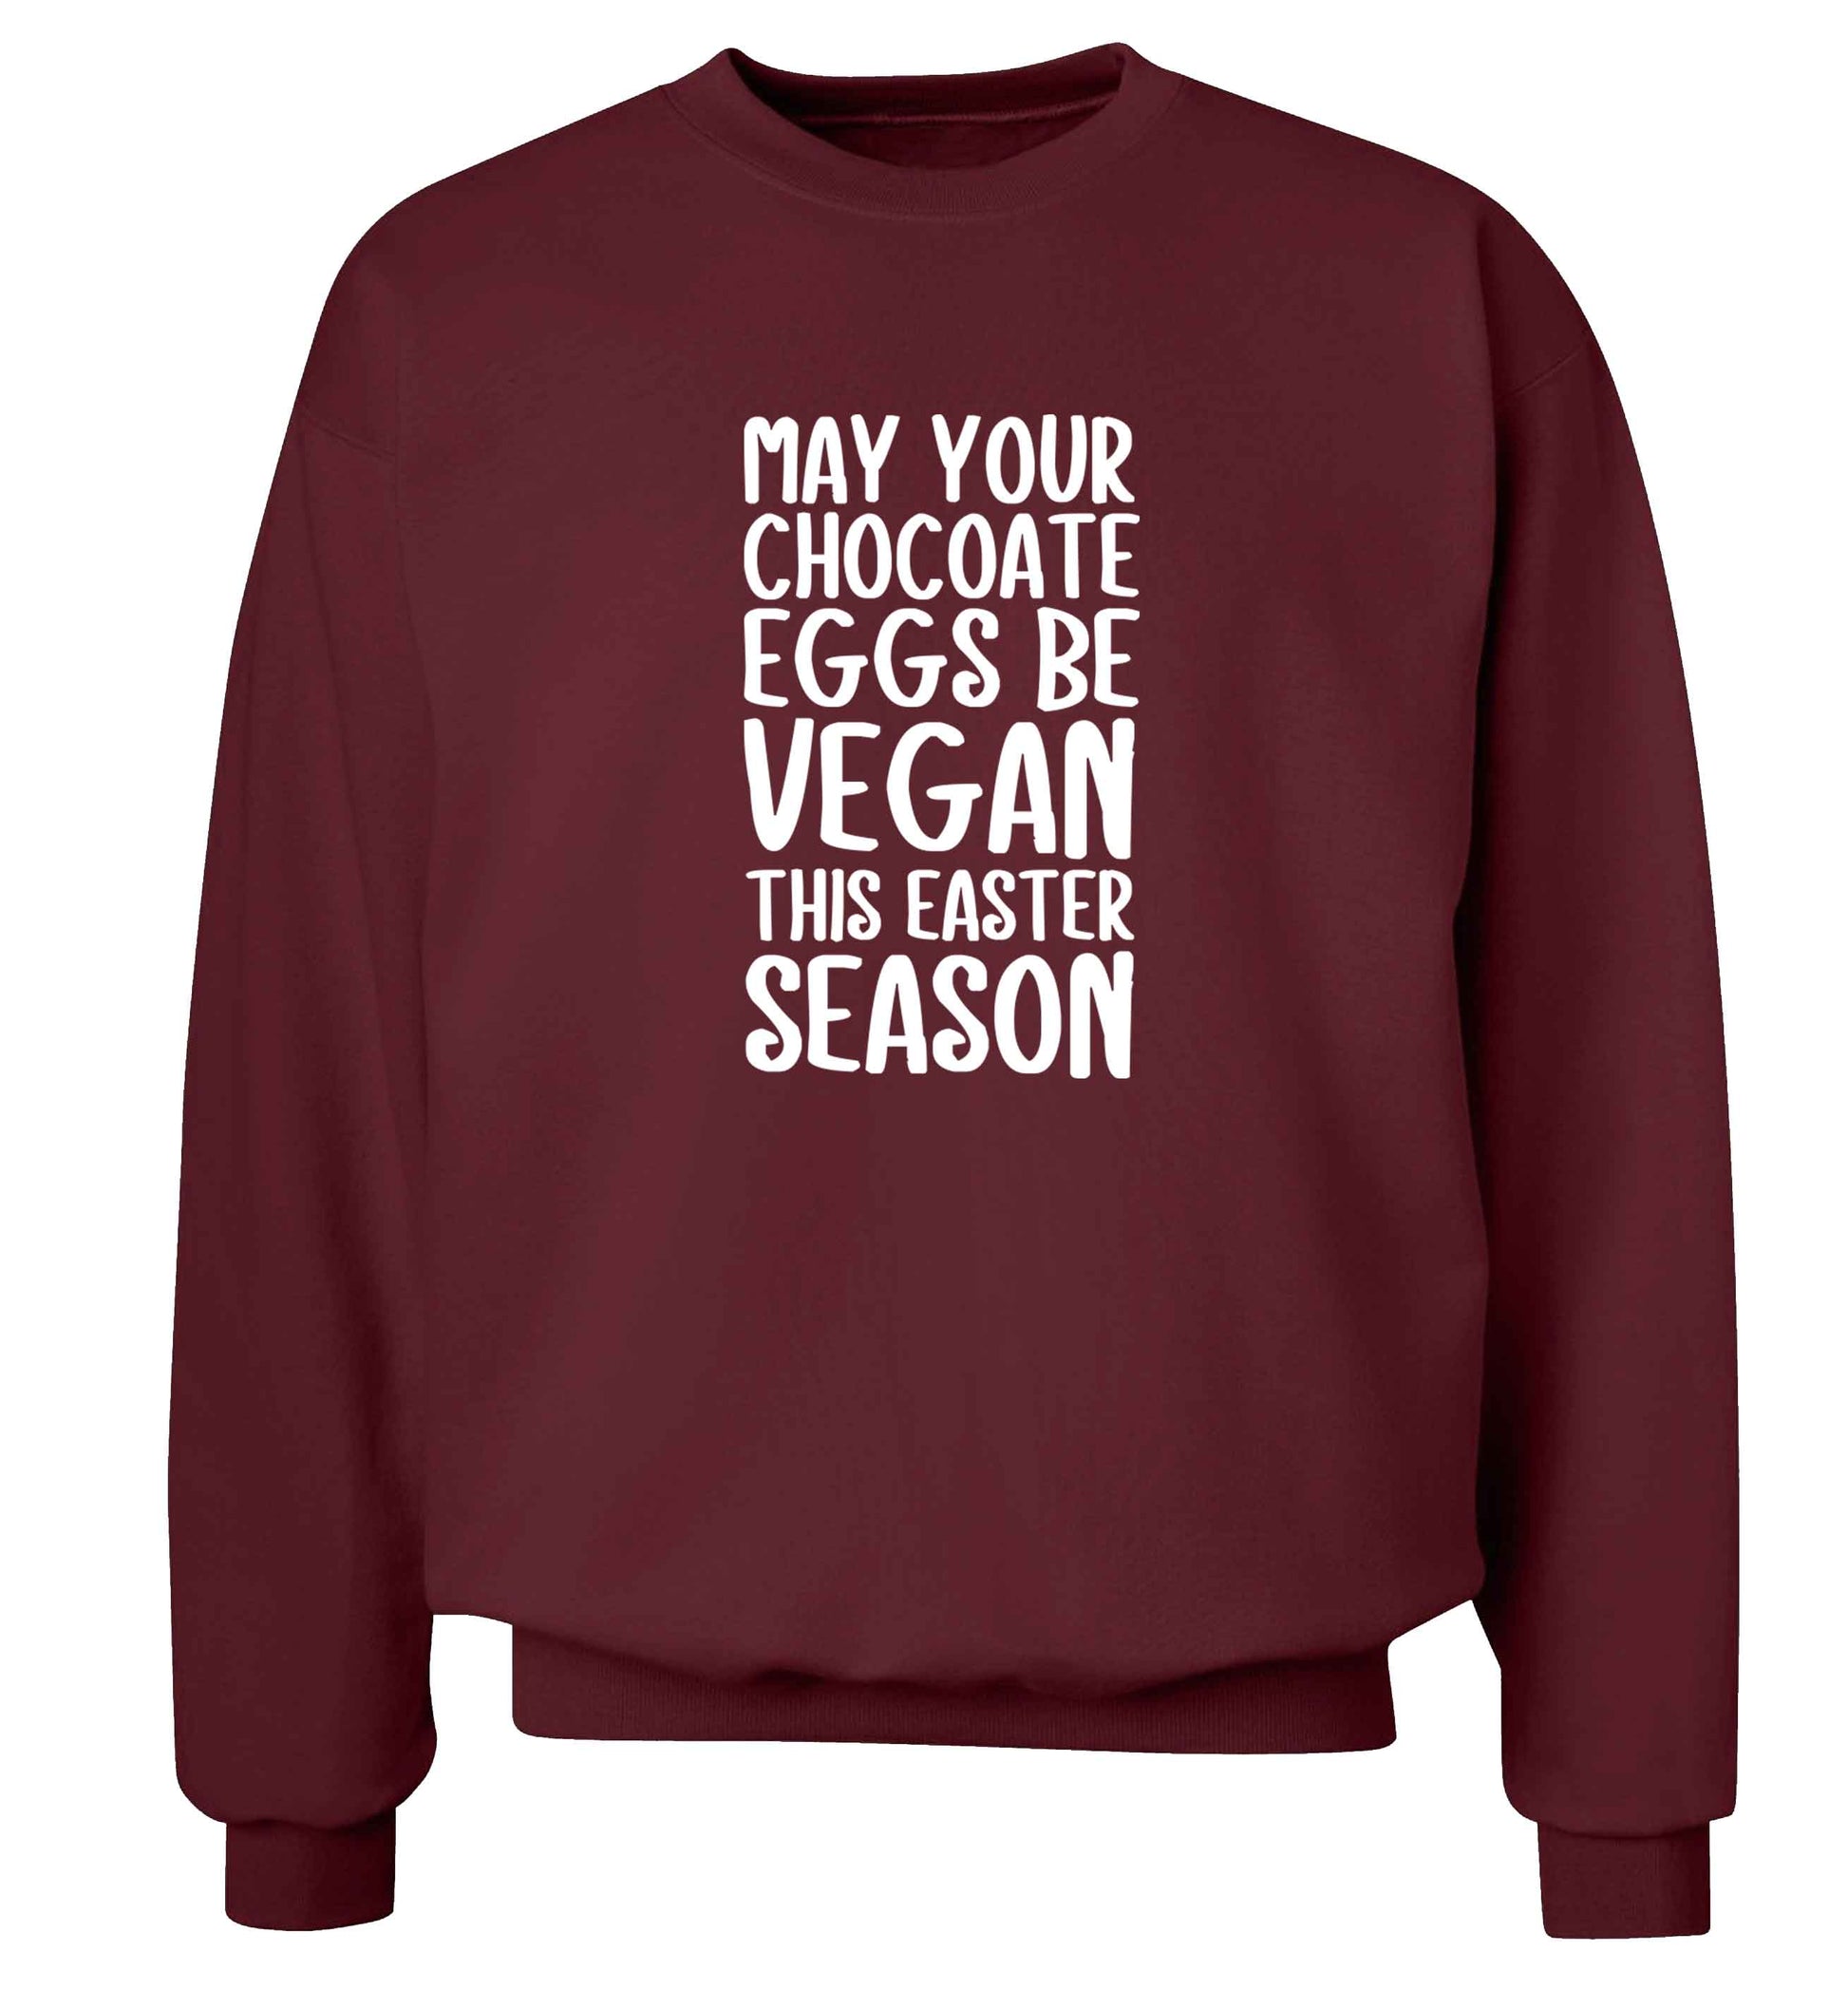 Easter bunny approved! Vegans will love this easter themed adult's unisex maroon sweater 2XL